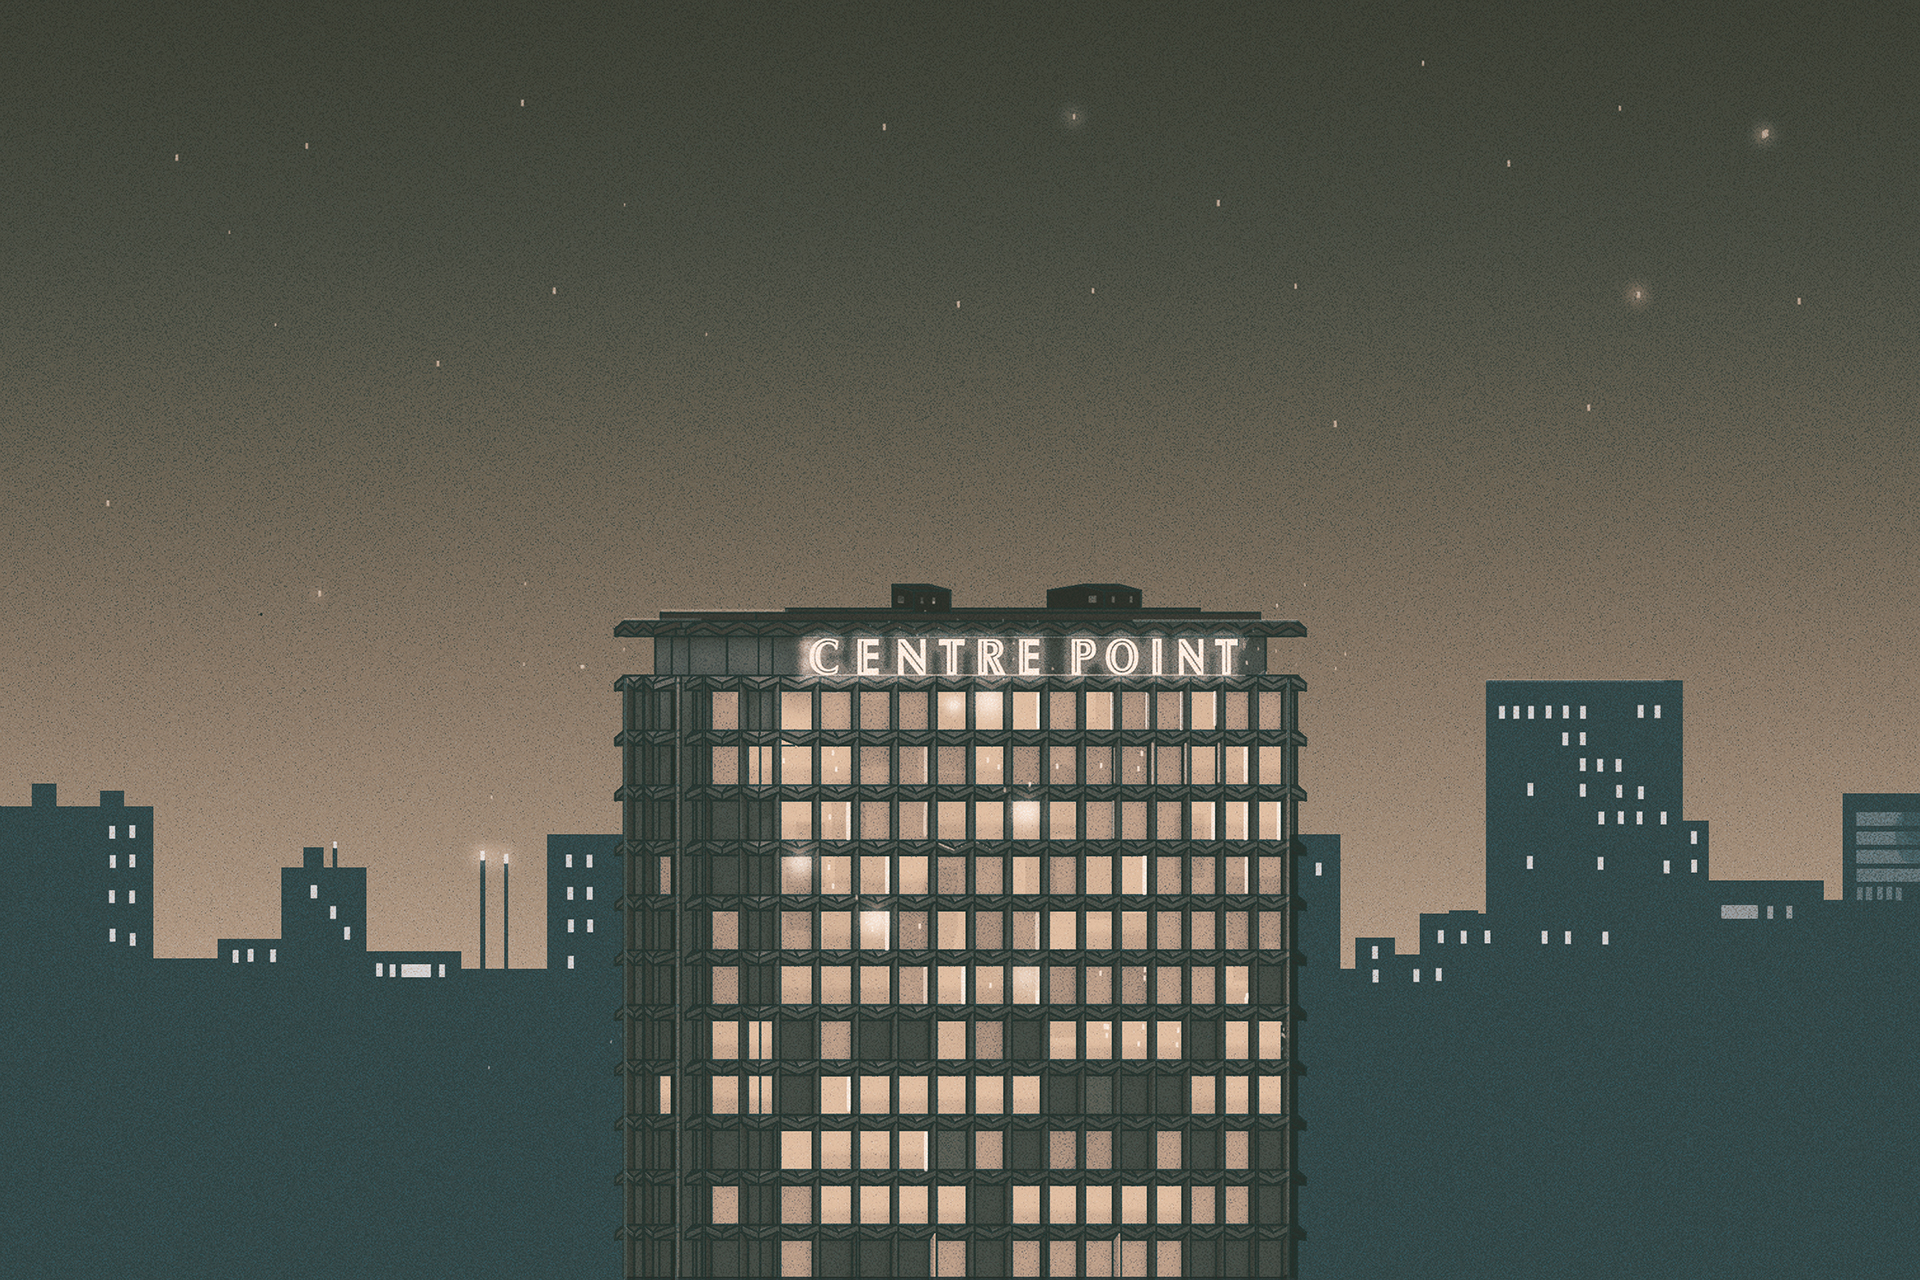 Wired x Almacantar_The Centre Point Sign.jpg